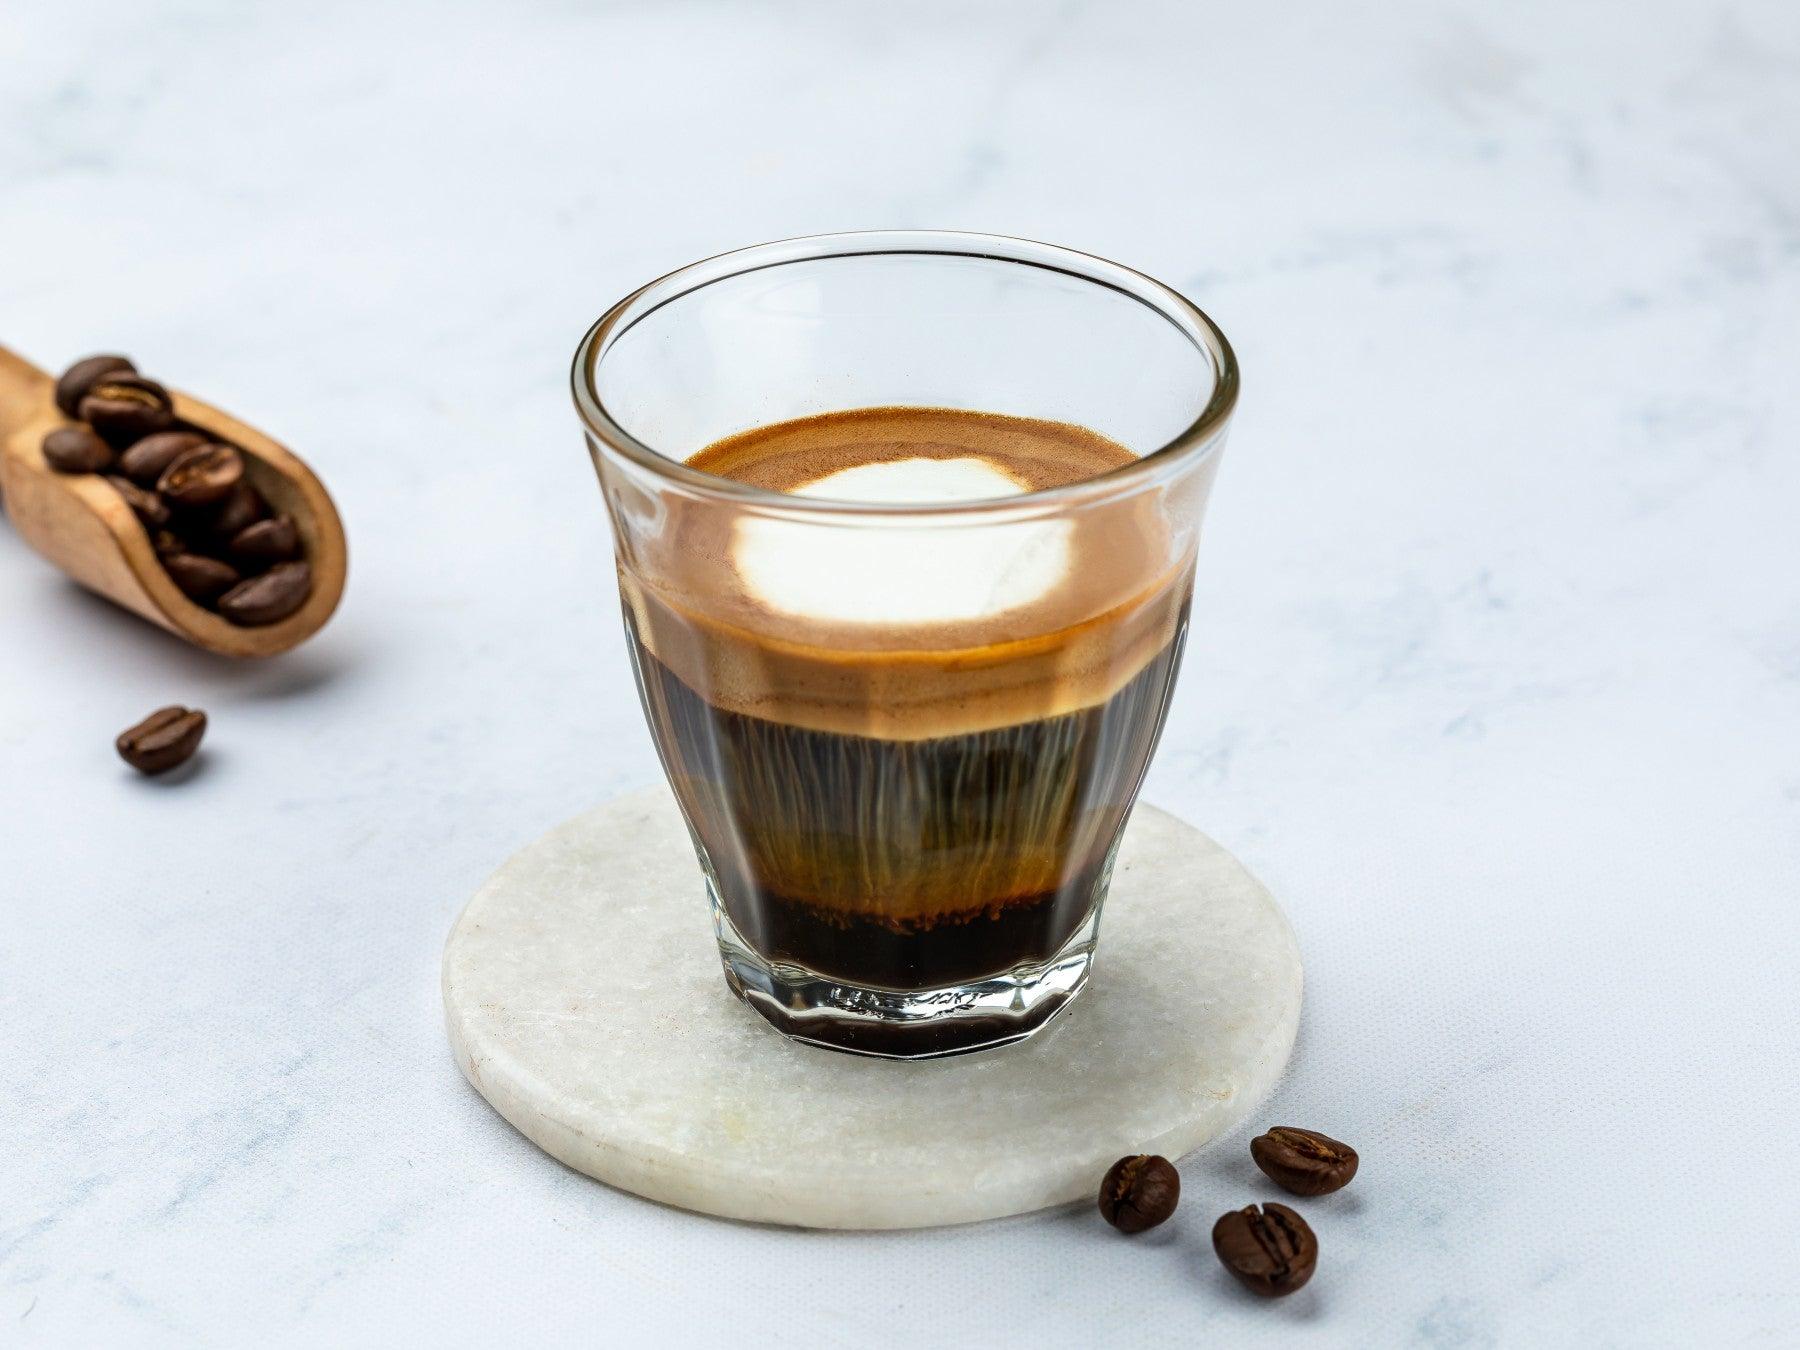 An Espresso Shot Depends on its Top Layer of Cream. How to make it perfect?, by Omma Mira